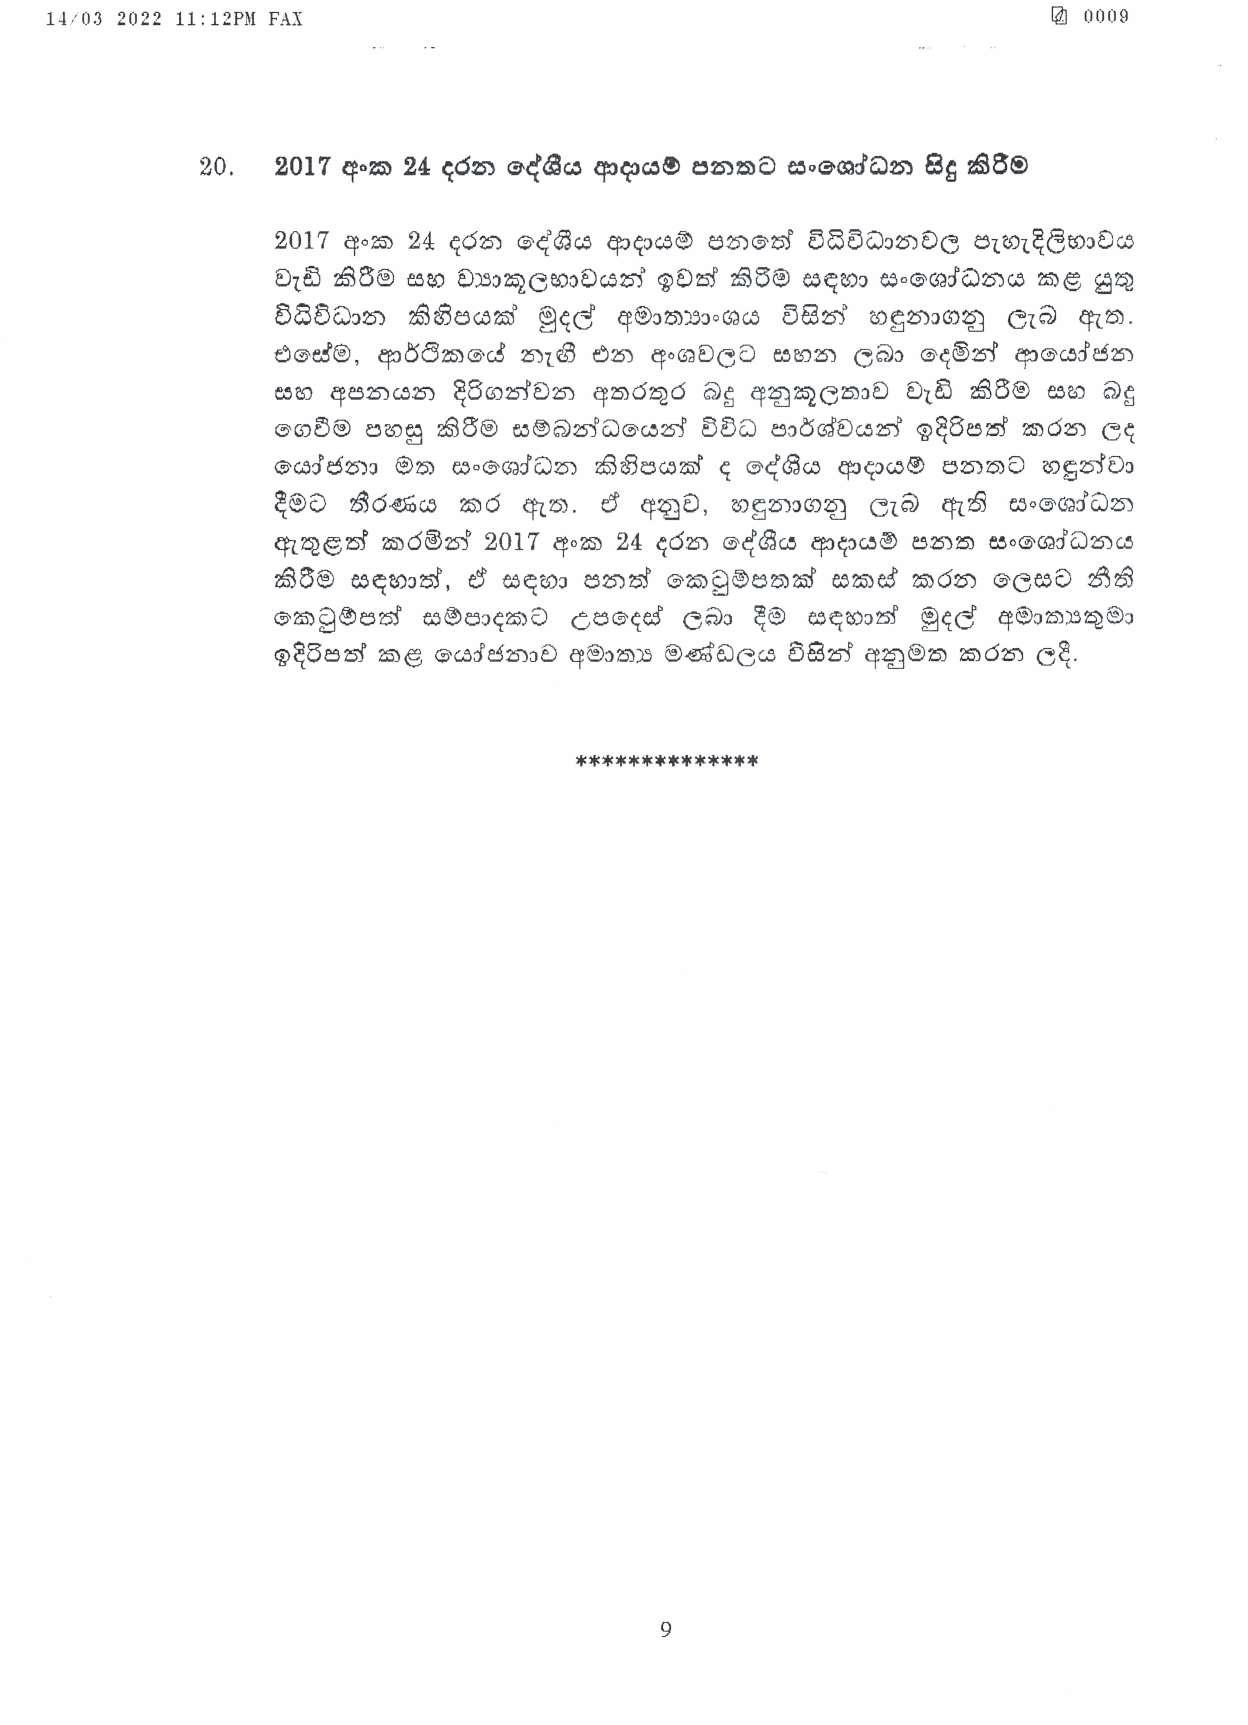 Cabinet Decision on 14.03.2022 page 009